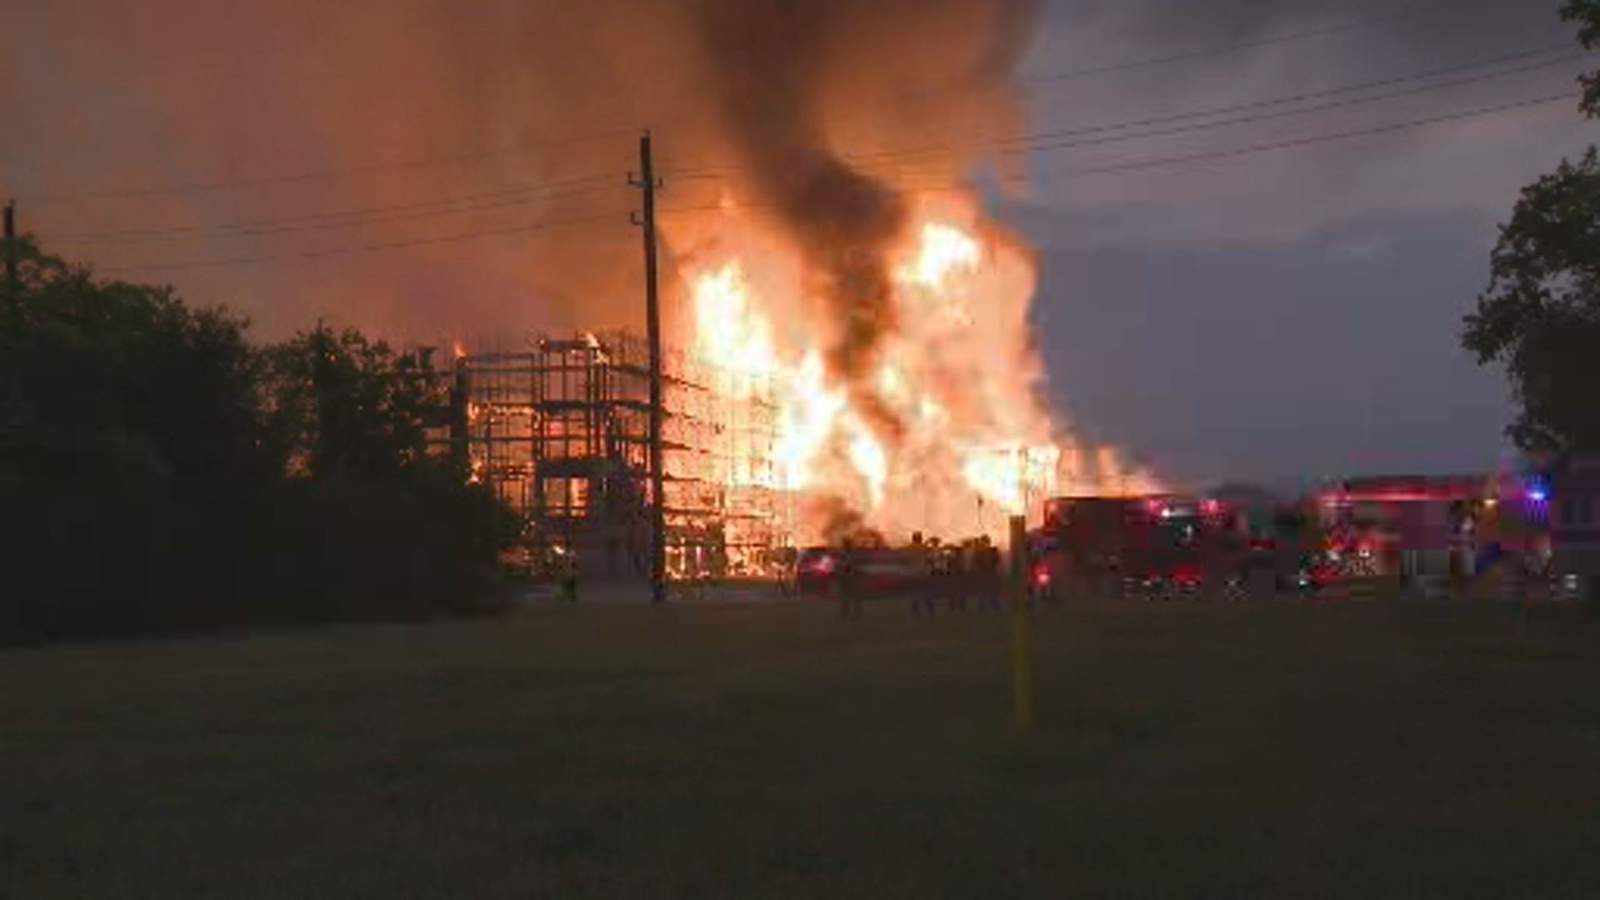 Firefighters respond to massive 3-alarm fire at apartment construction site in Katy area